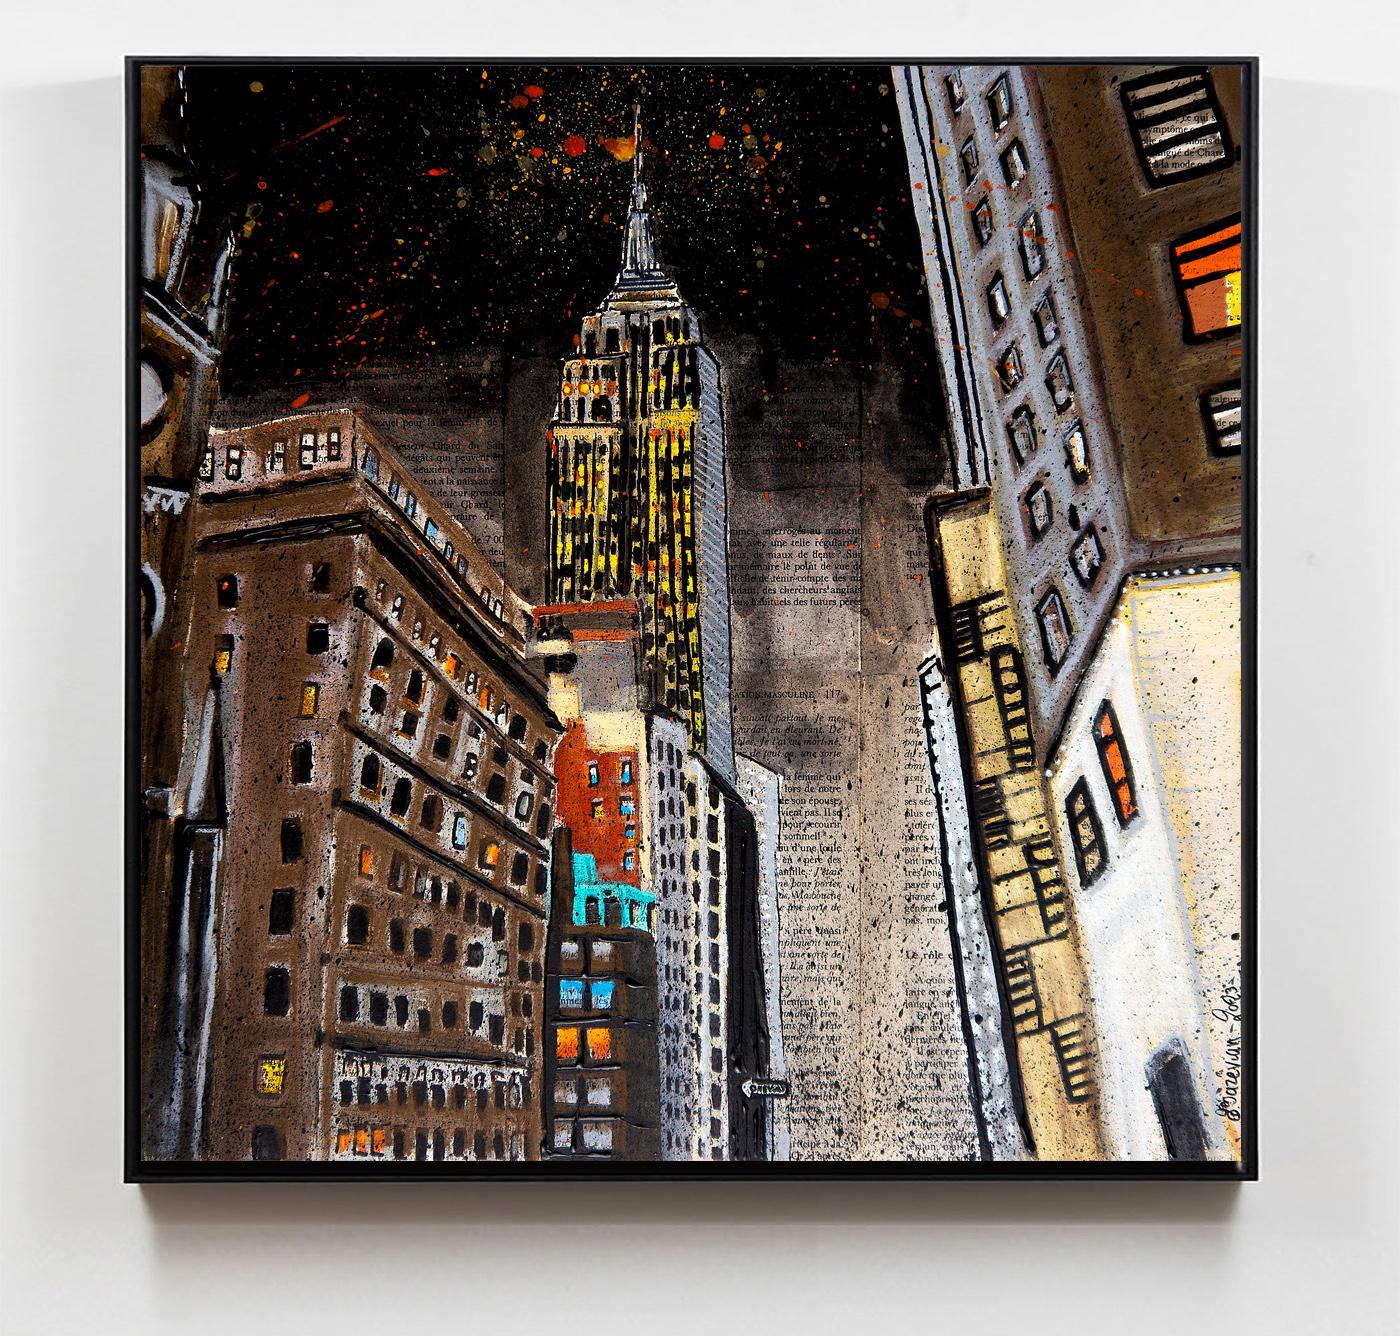 French School - Urban New York City Empire State Building  Post Impressionist - Painting by Bazevian DelaCapuciniere